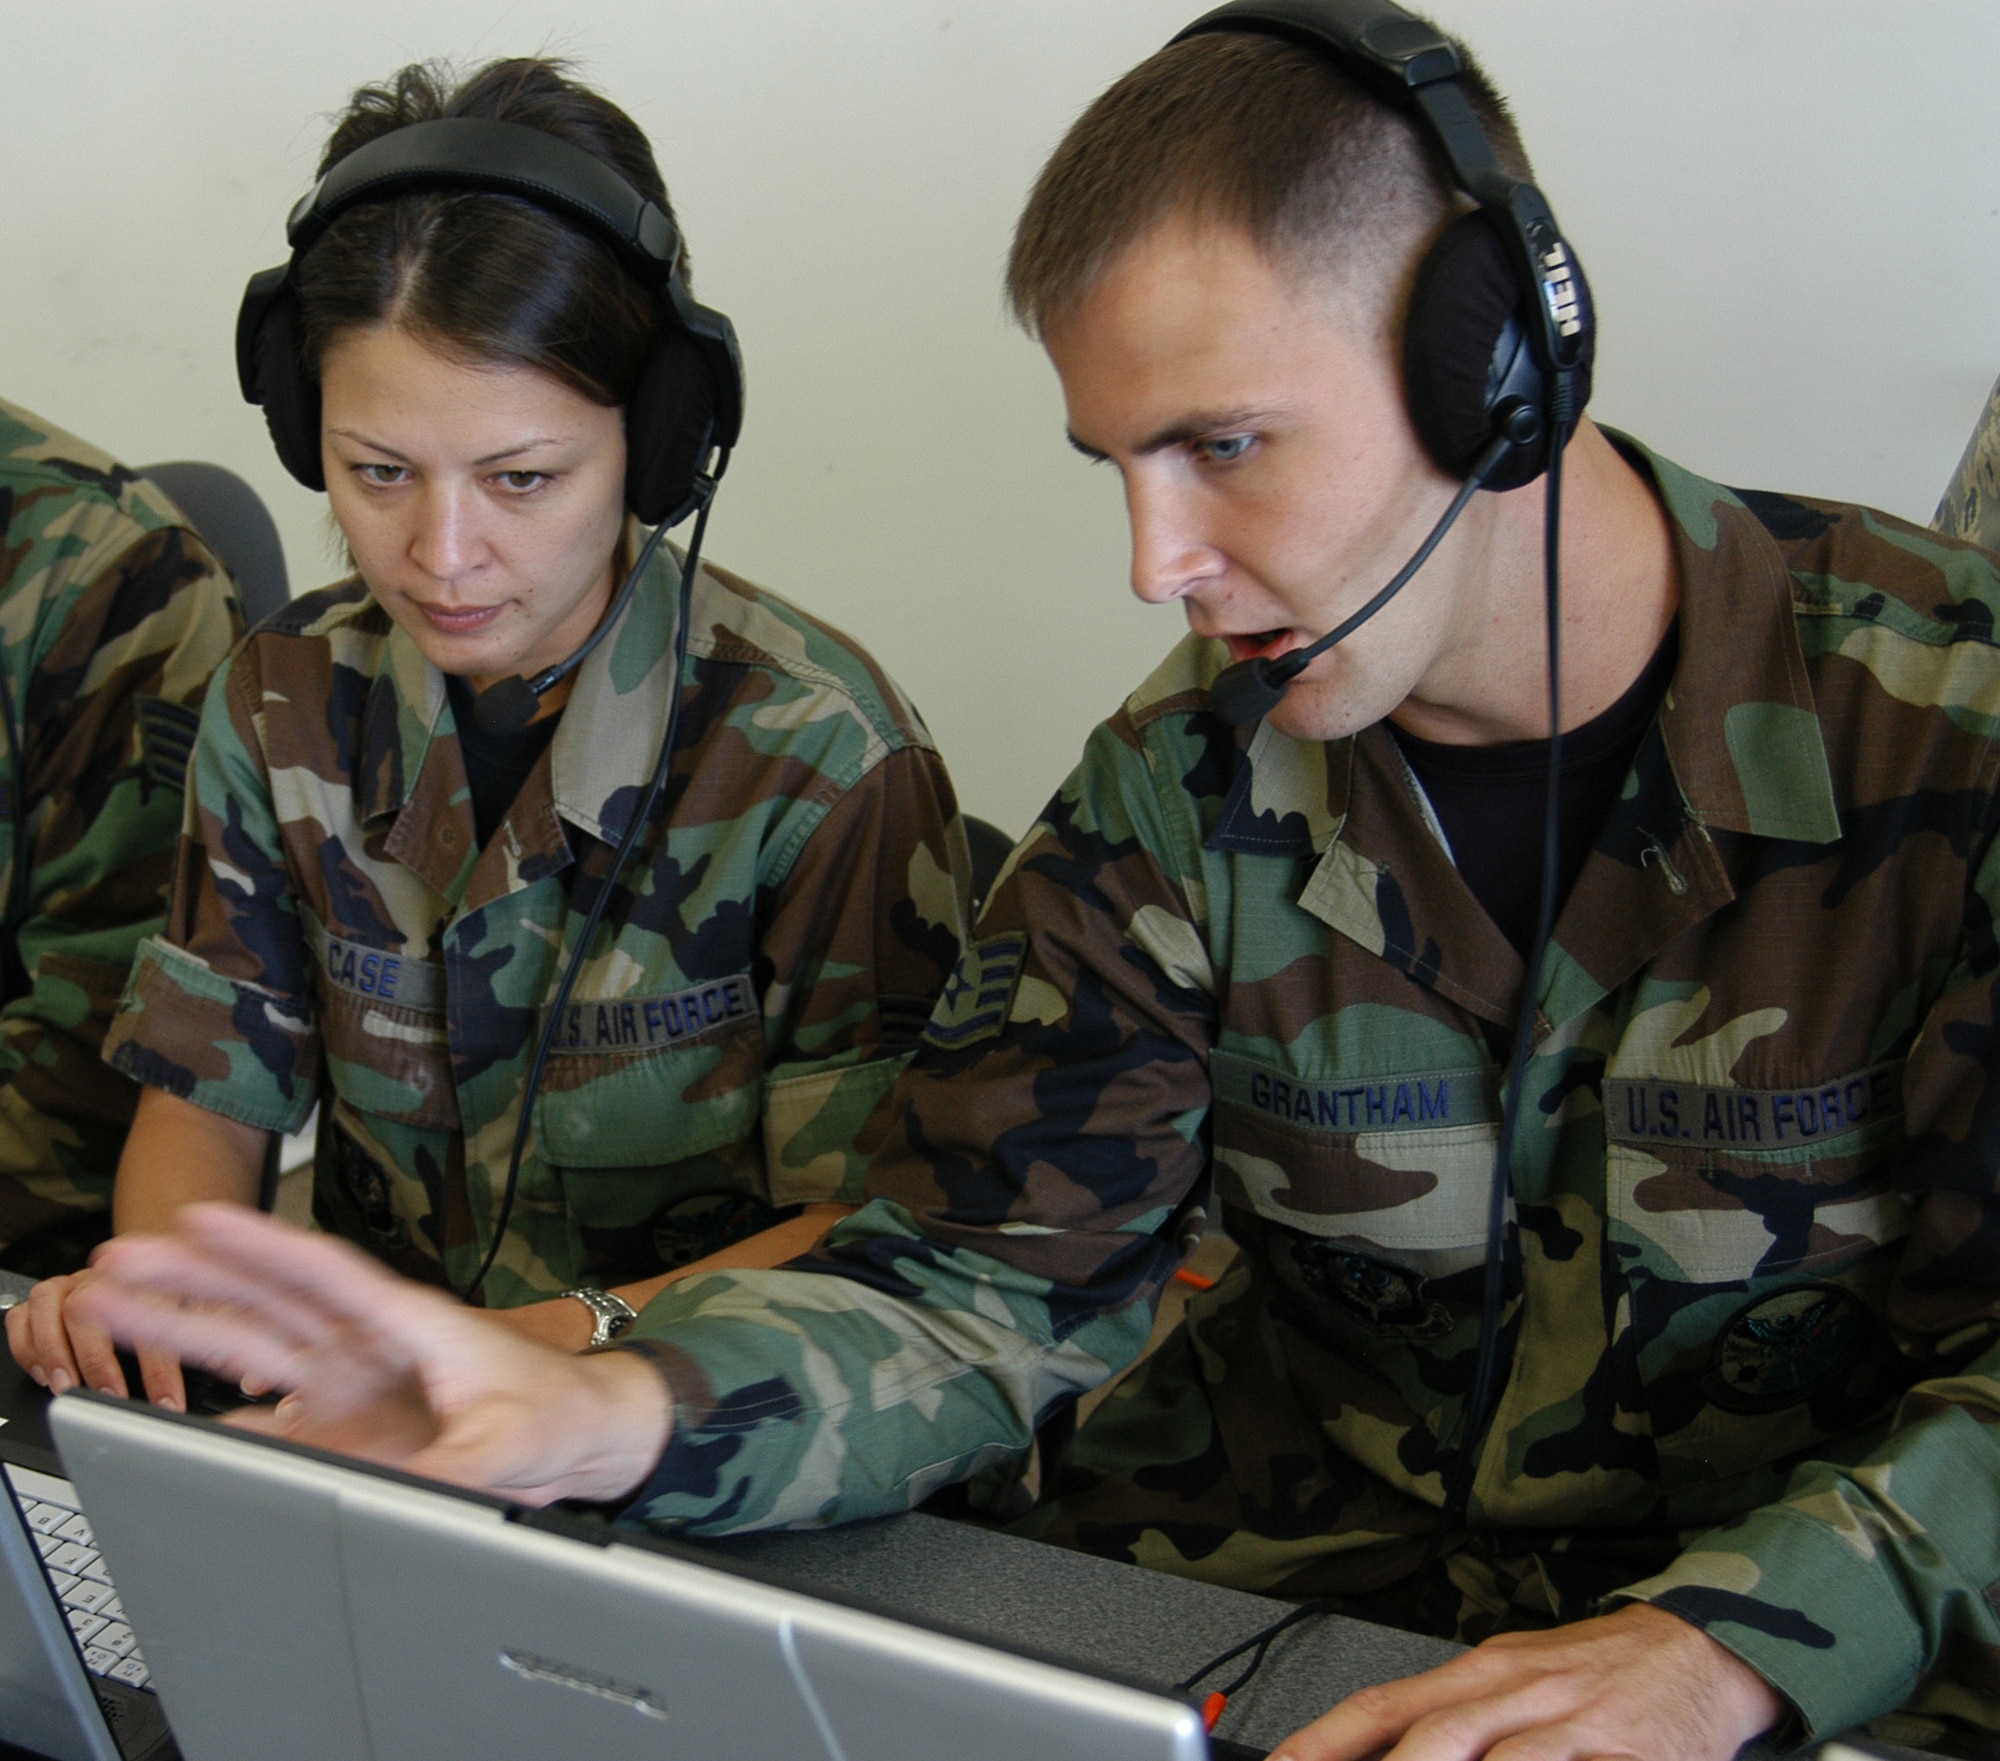 Staff Sgts. Joe Grantham (right) and Jenny Case discuss specifics of the Joint Base Station during some familiarization time after training on the system Aug. 18. The JBS is an all-in-one communications system capable of voice/data communications, local area network and email capabilities. The Guardsmen trained on most of the equipment they would use while deployed to ensure they would be well prepared to support units when tasked. Sergeants Grantham and Case are from the 280th Combat Communications Squadron, a traditional Air National Guard unit out of Dothan, Ala. (U.S. Air Force photo/Tech. Sgt. Aaron Cram) 